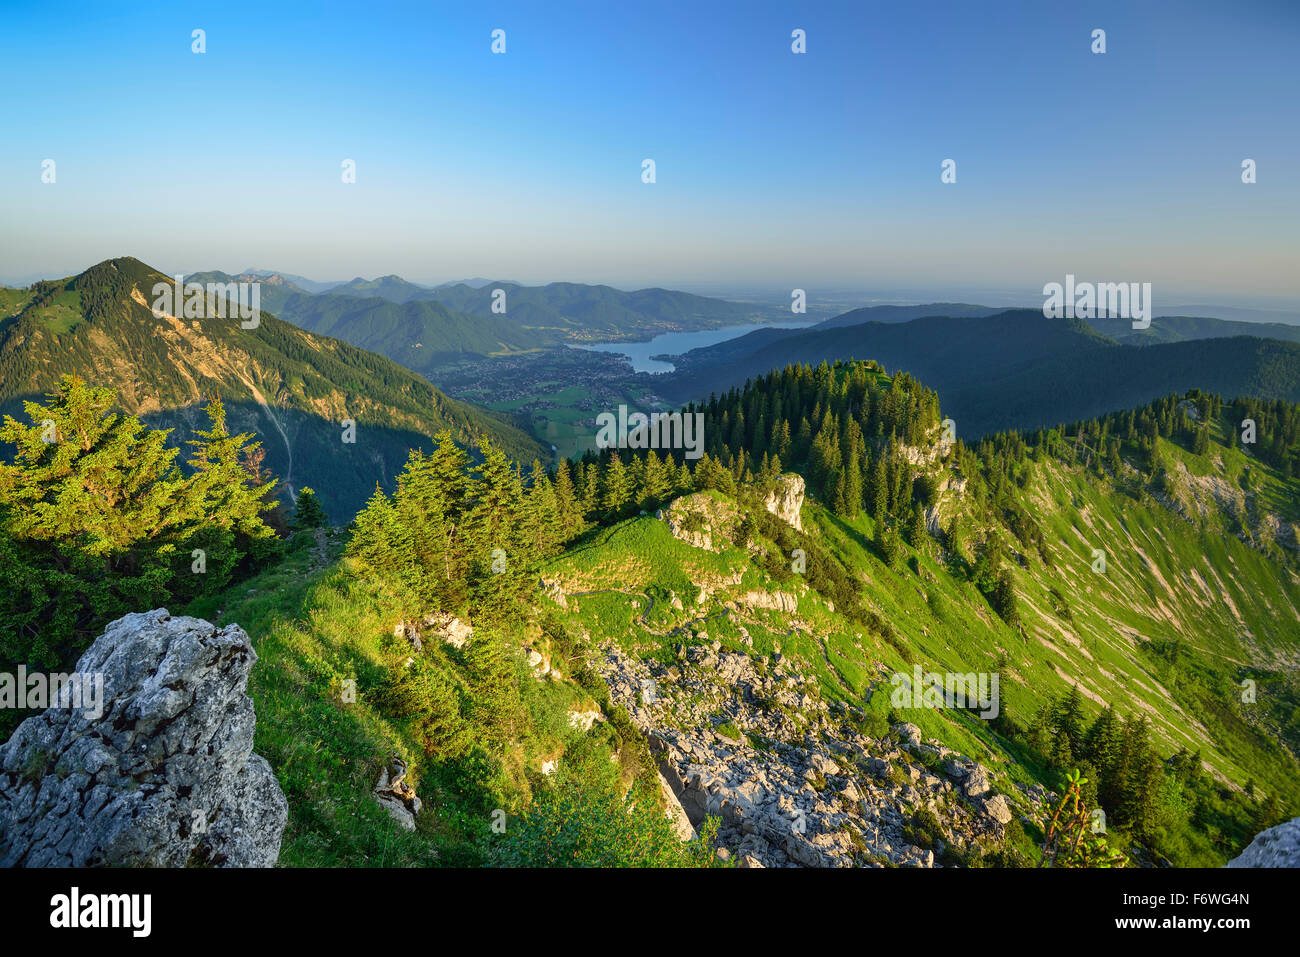 View from the summit of Bodenschneid to Wallberg and lake Tegernsee, Bodenschneid, Spitzing, Bavarian Alps, Upper Bavaria, Bavar Stock Photo